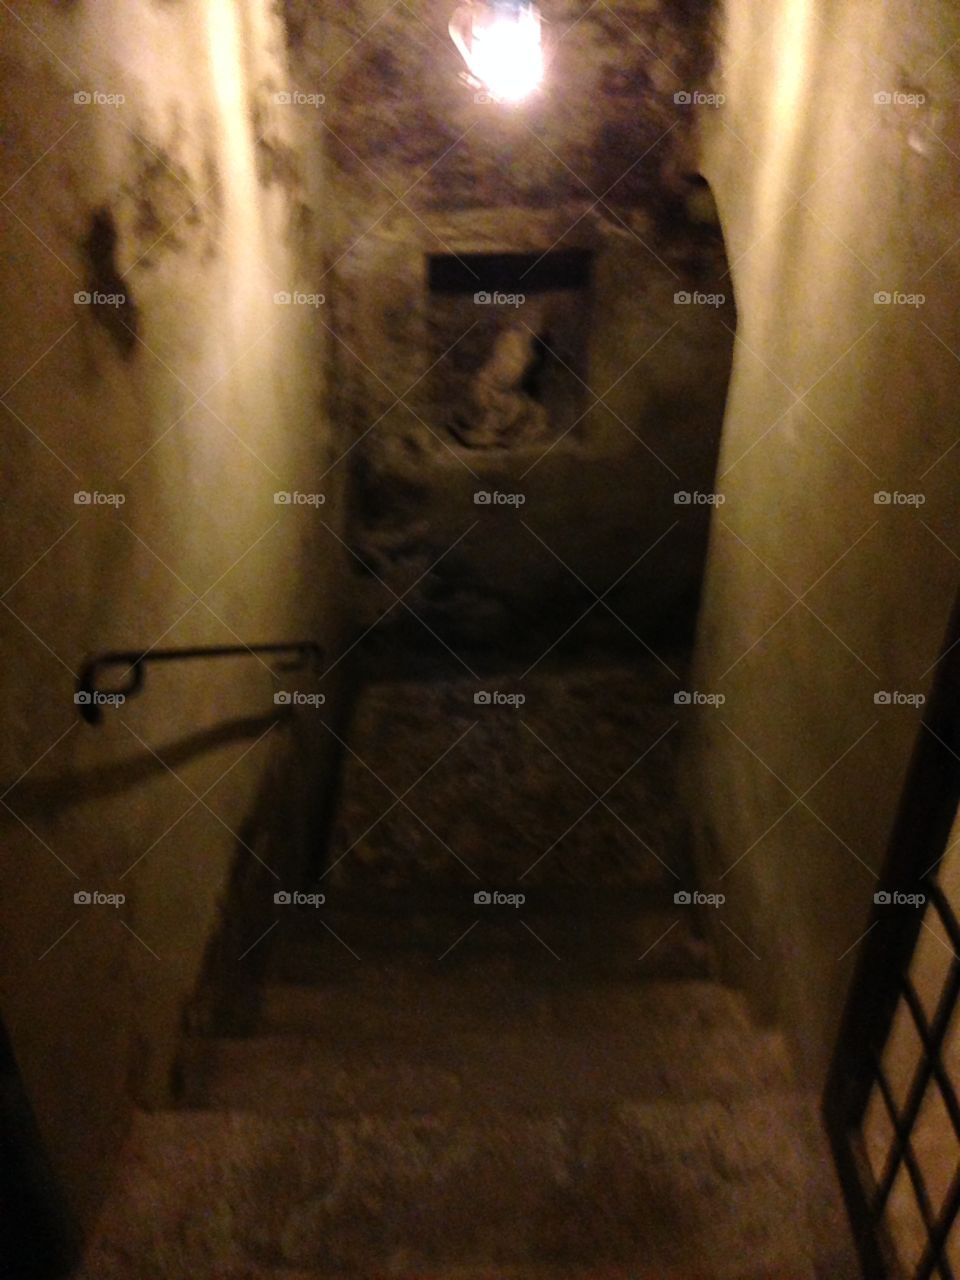 Steps to the cellar 